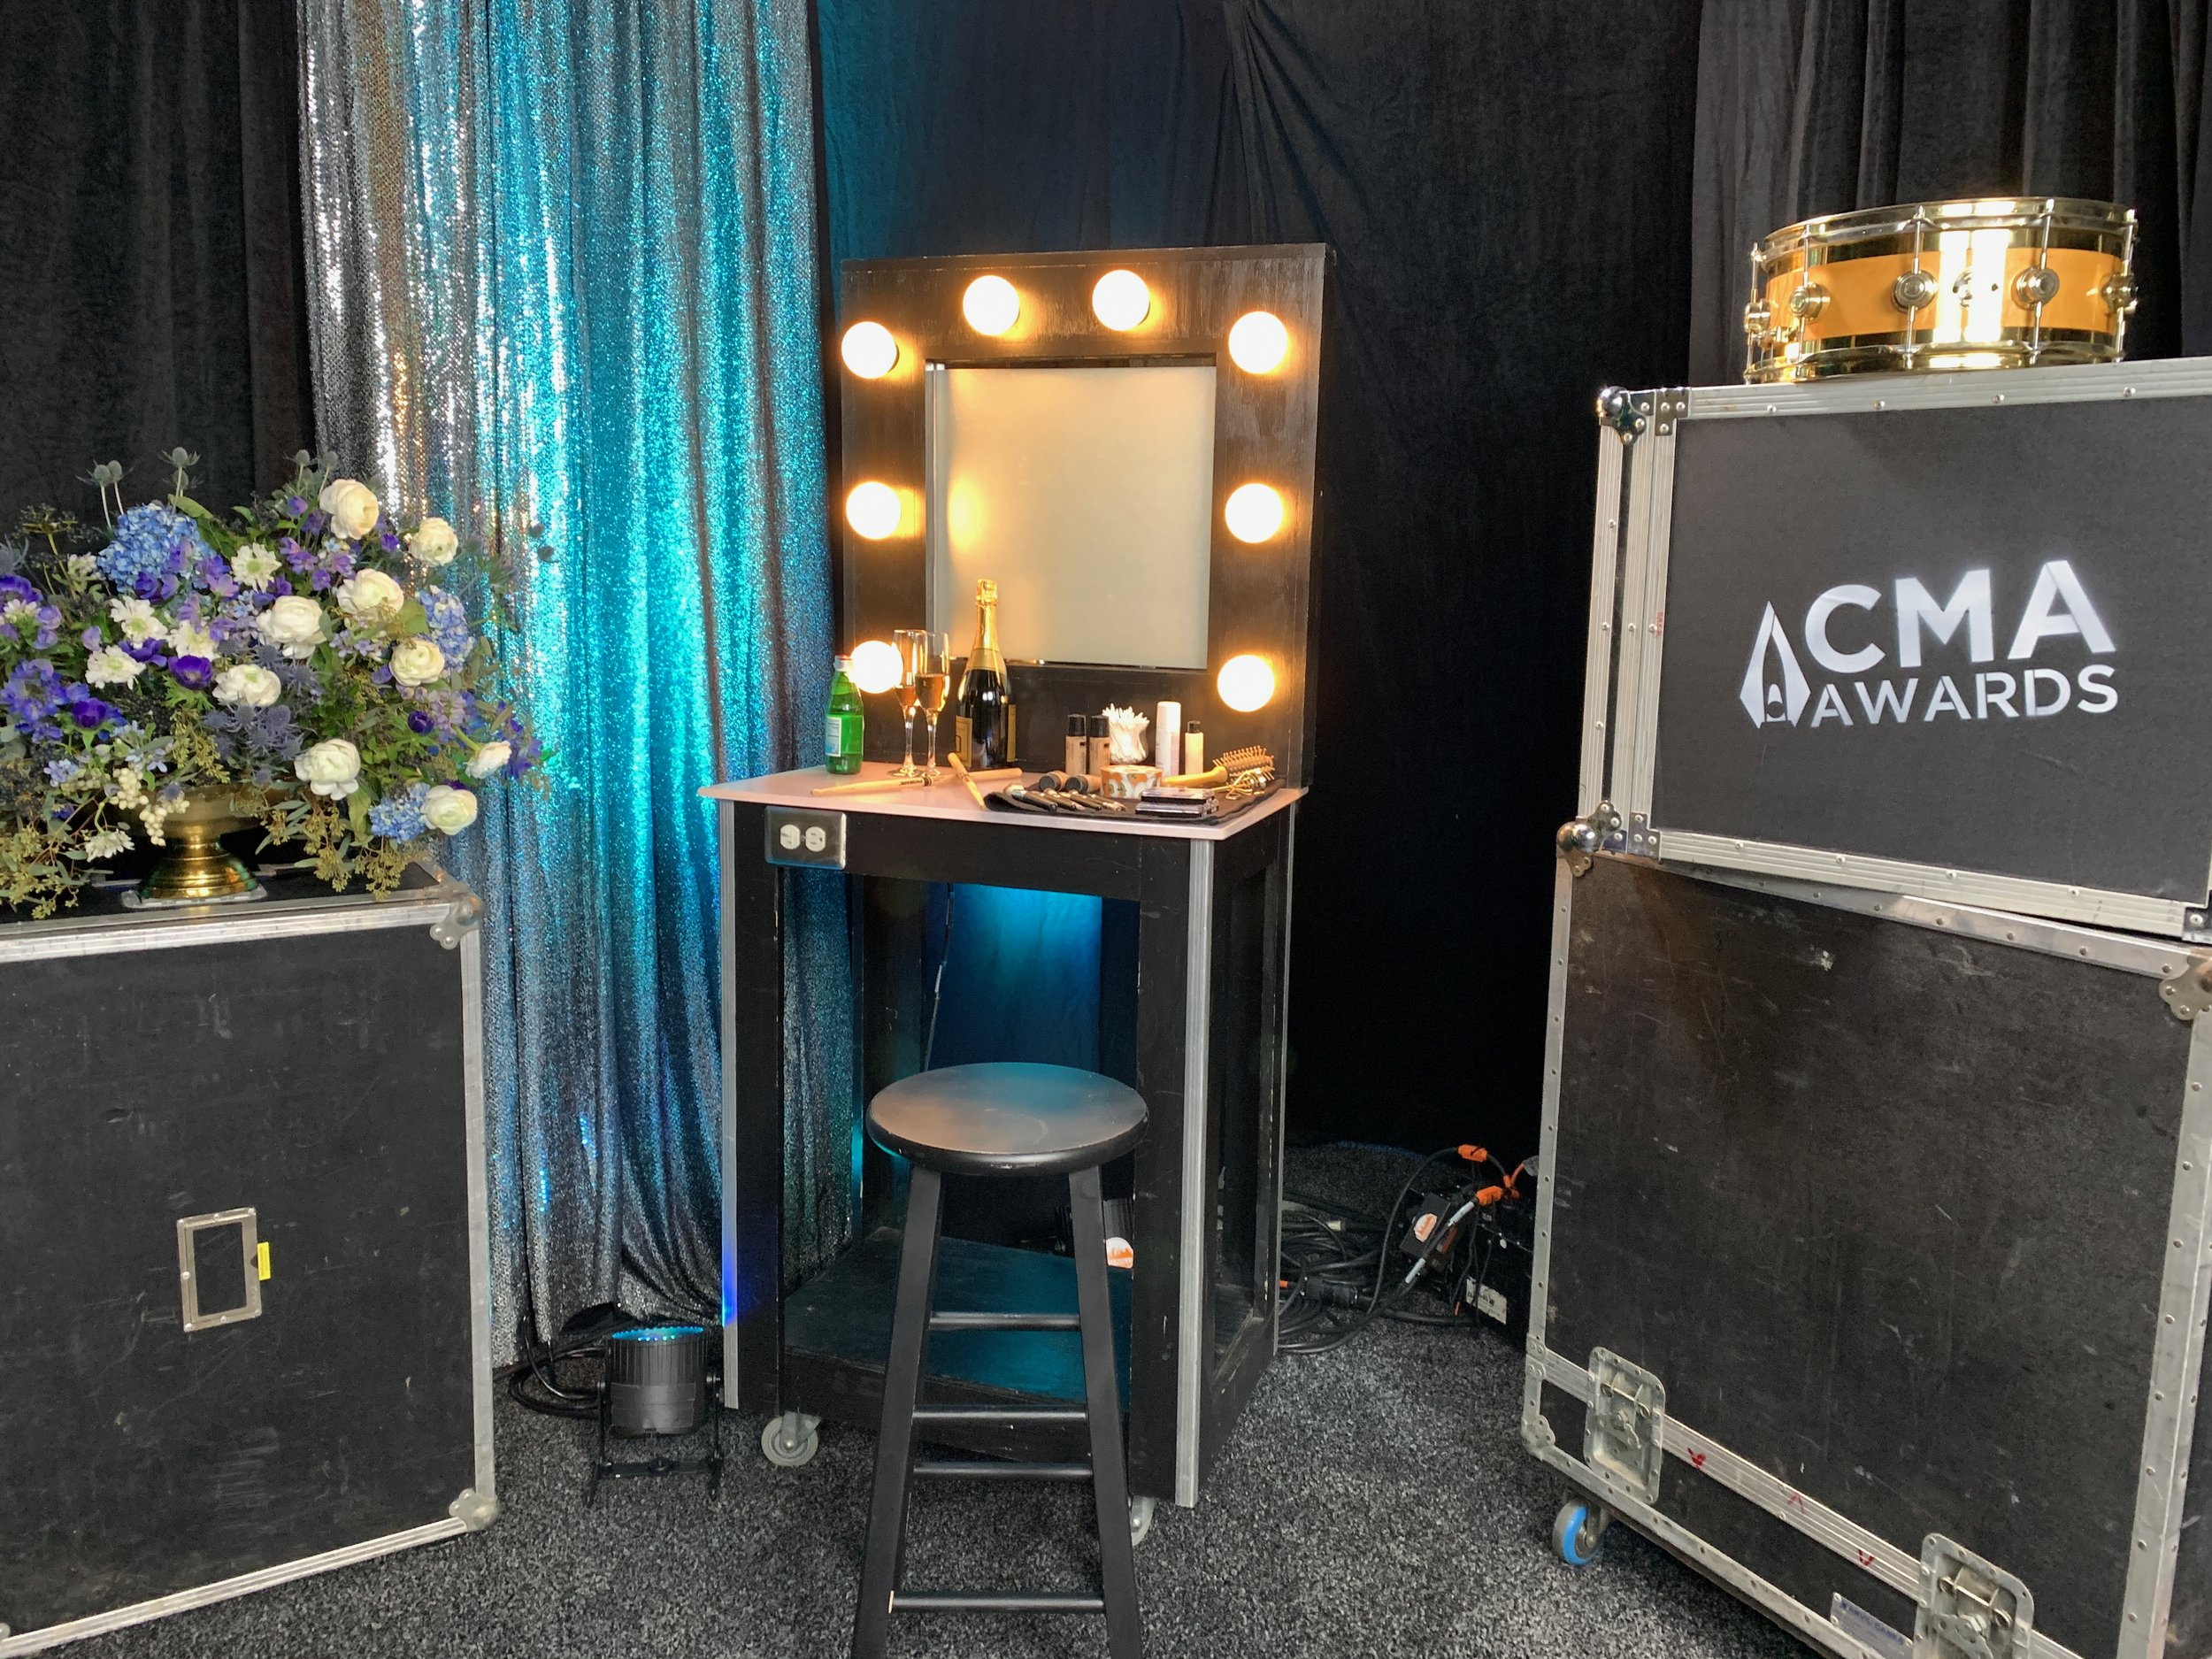 CMA back stage at the show